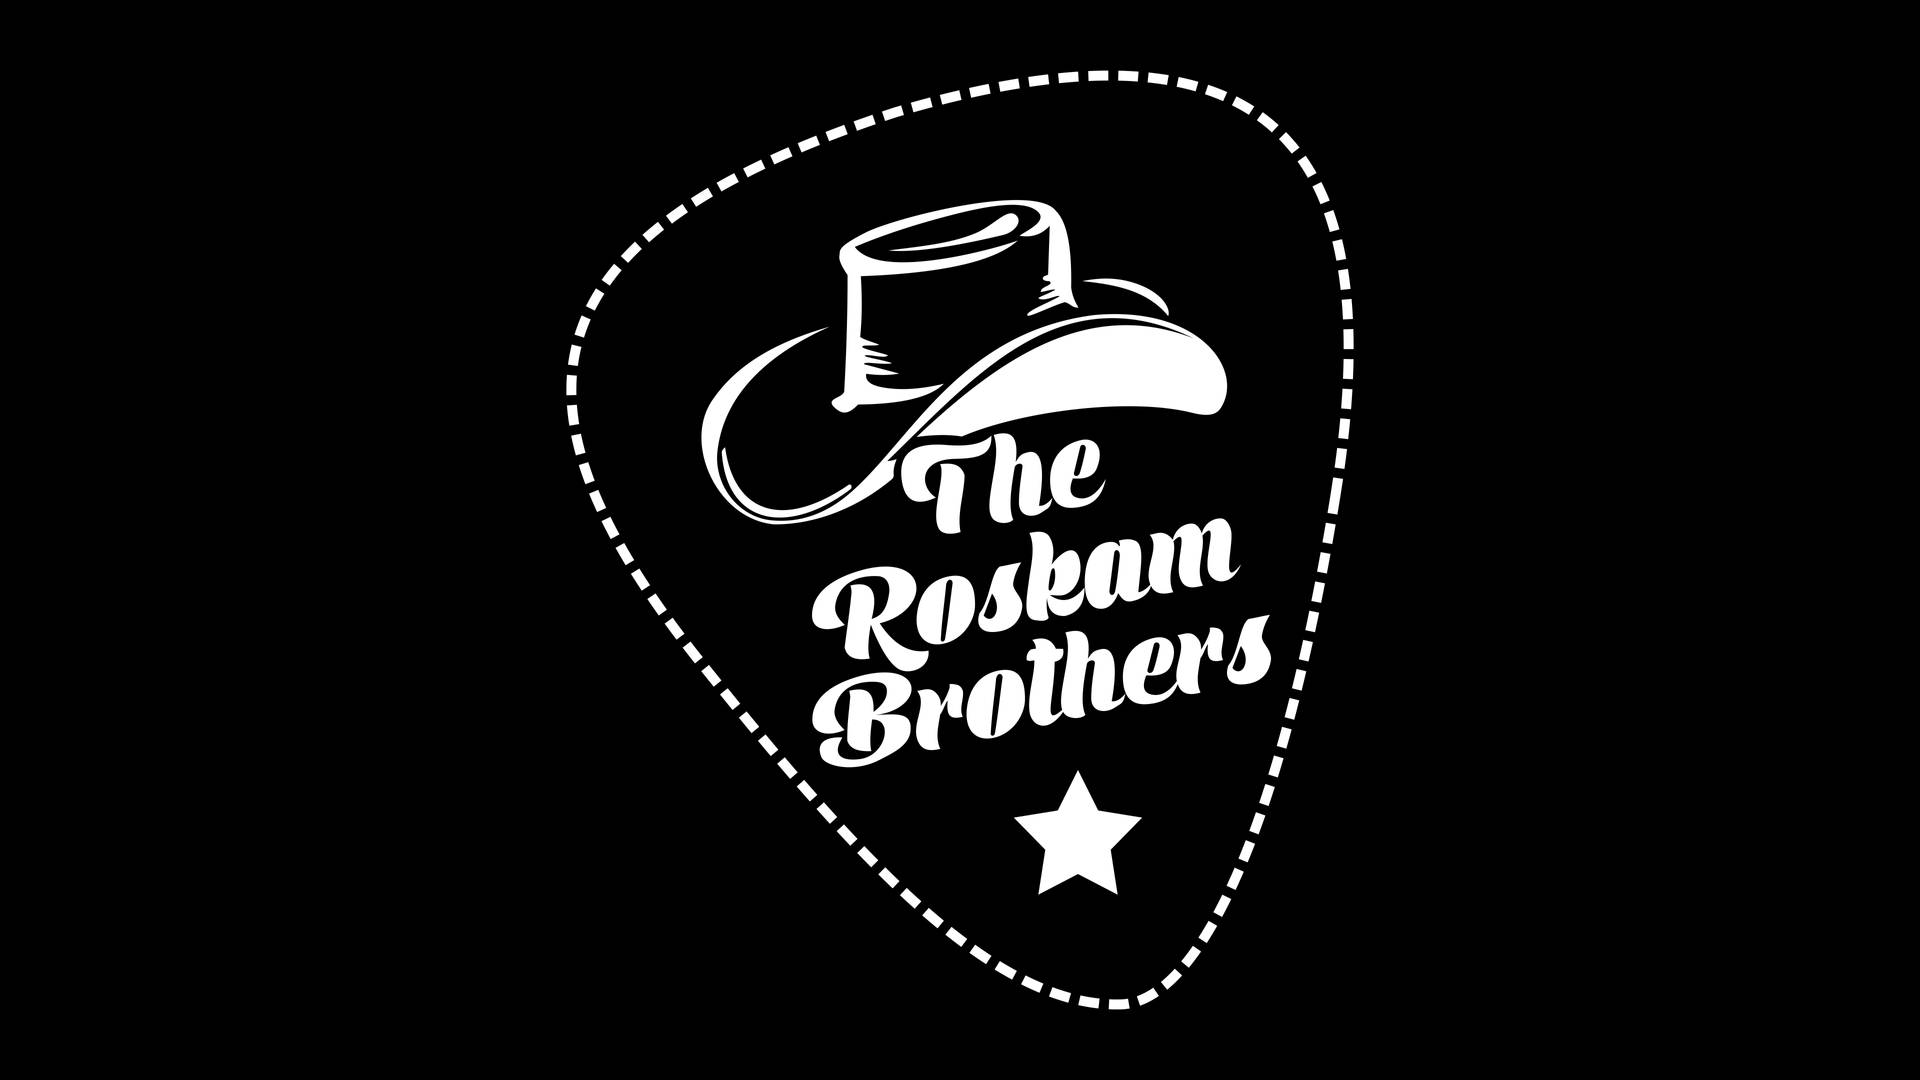 Far Cry 5 The Roskam Brothers Logo Picture